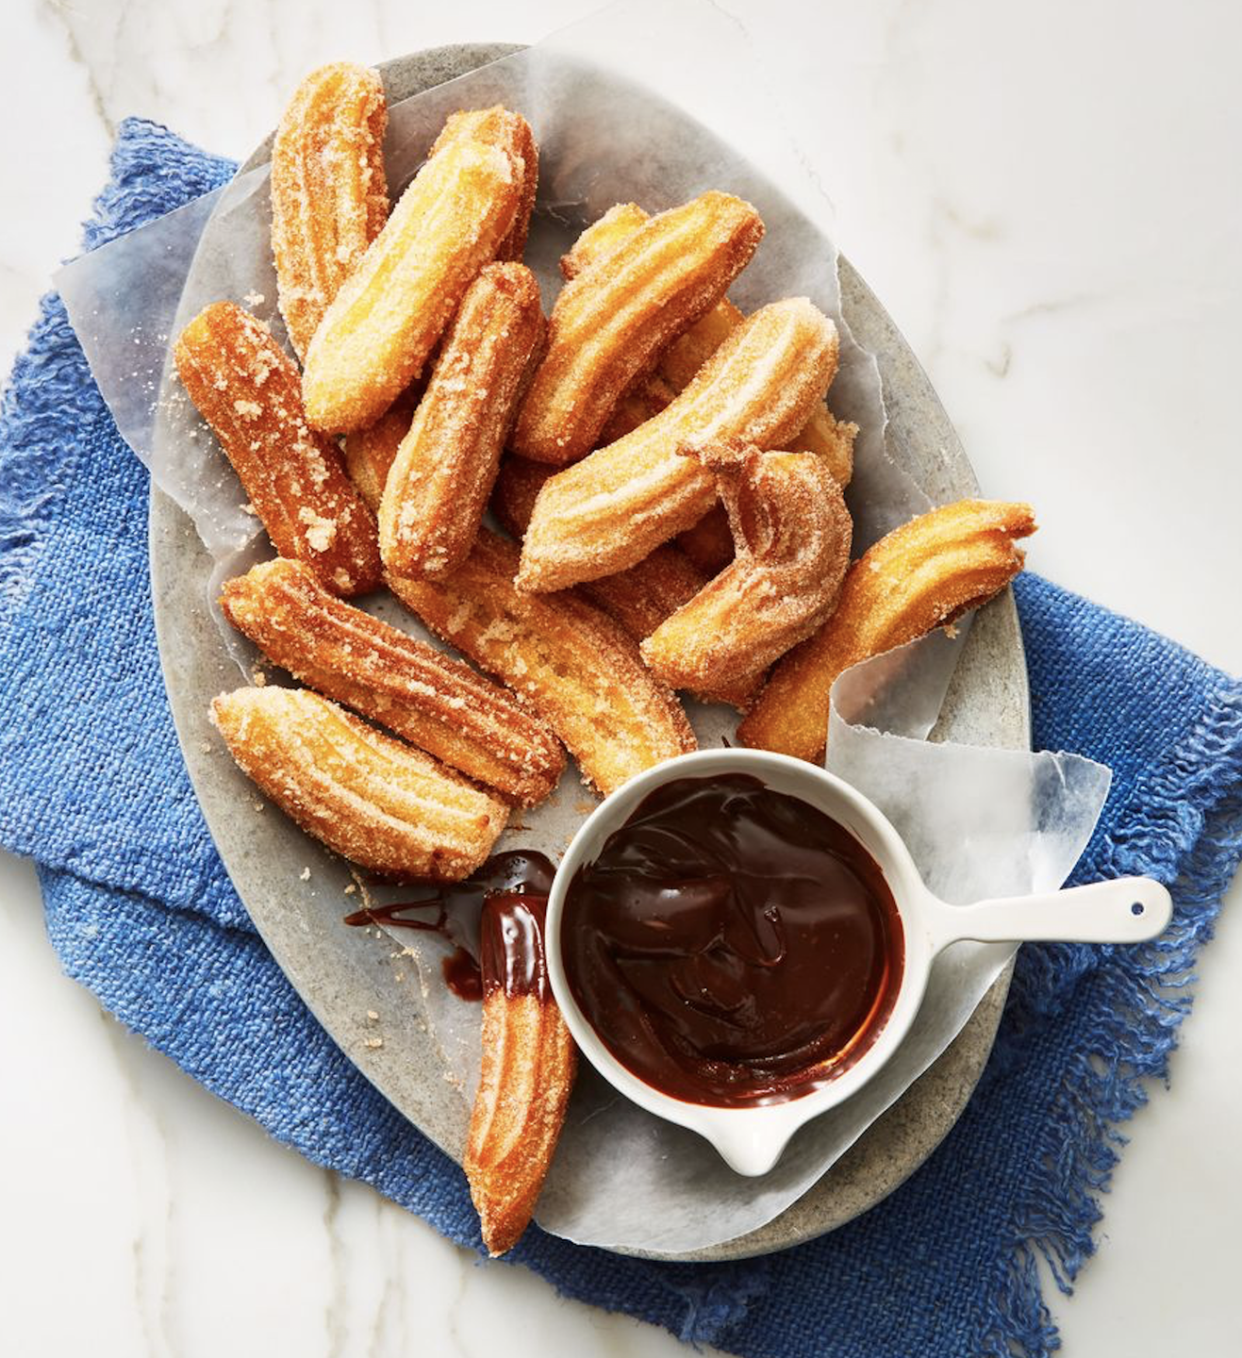 cinnamon churros with chocolate dipping sauce on the side